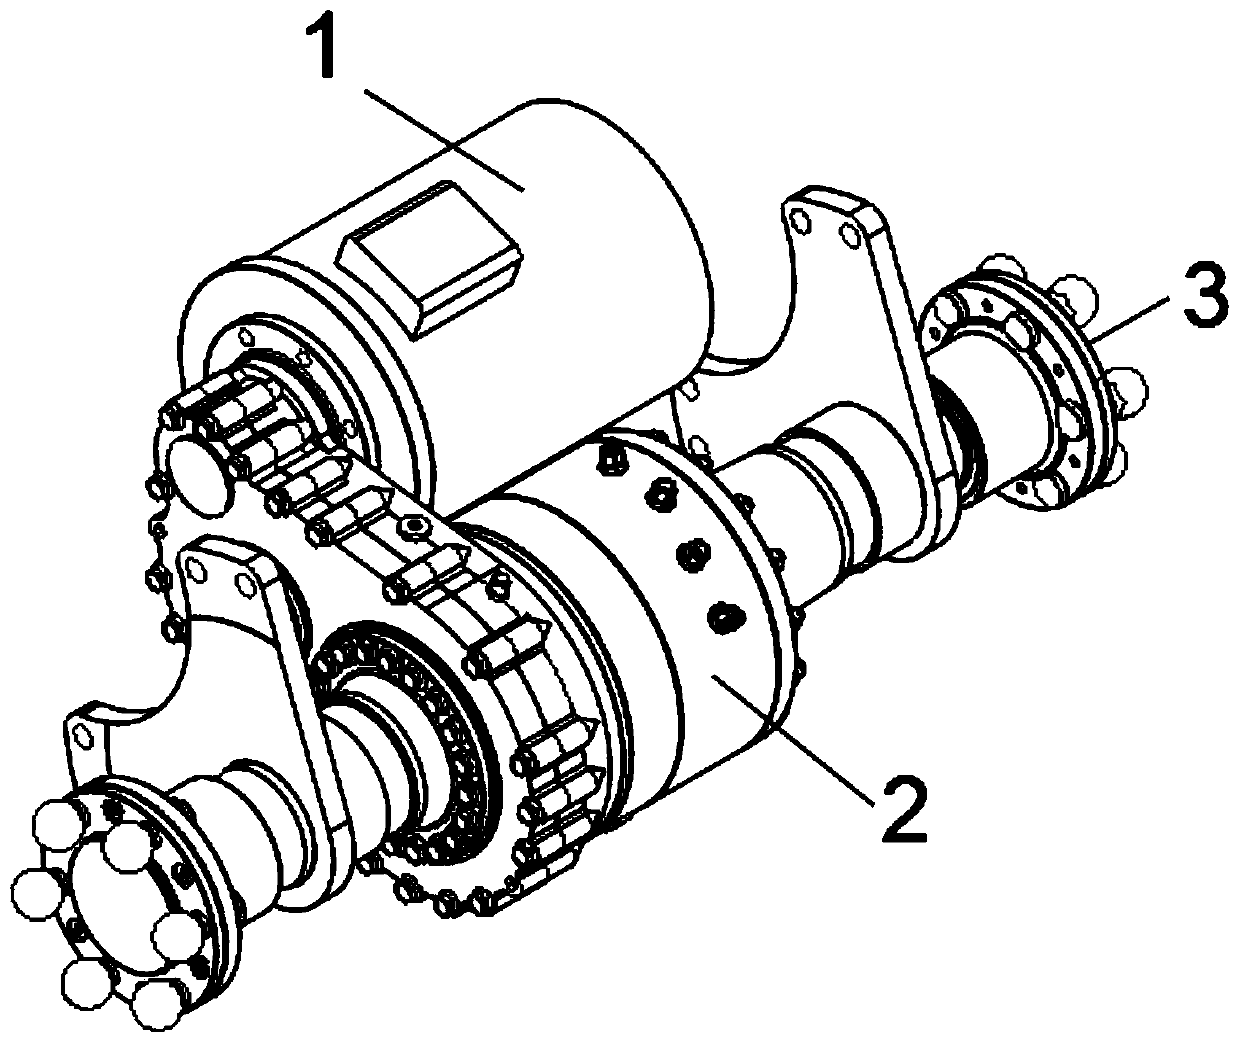 Electric drive axle capable of conducting central double-acting wet braking